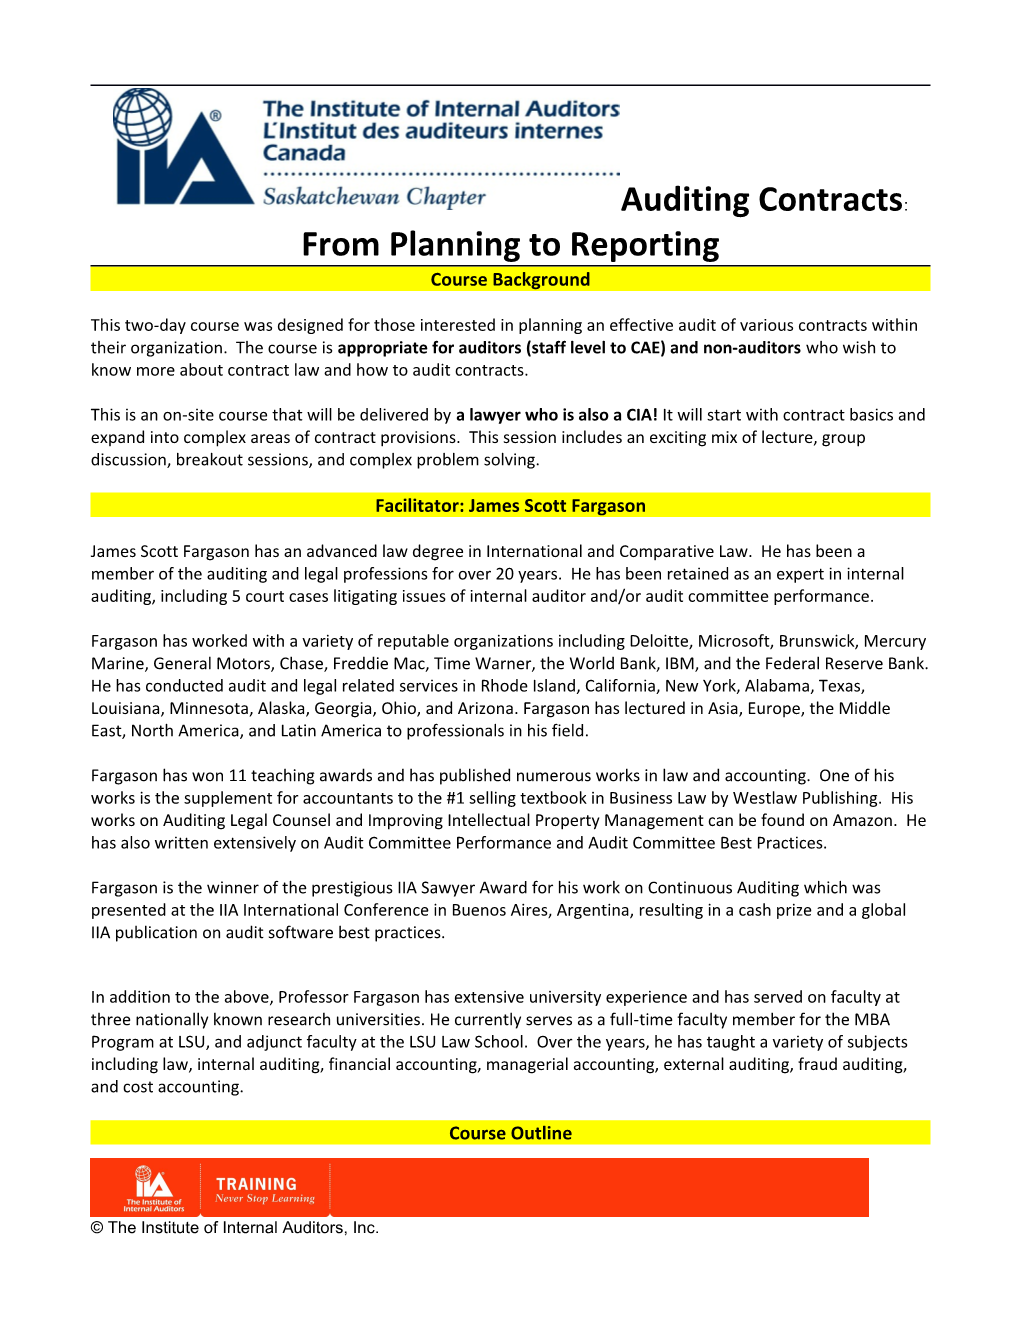 Auditing Contracts: from Planning to Reporting